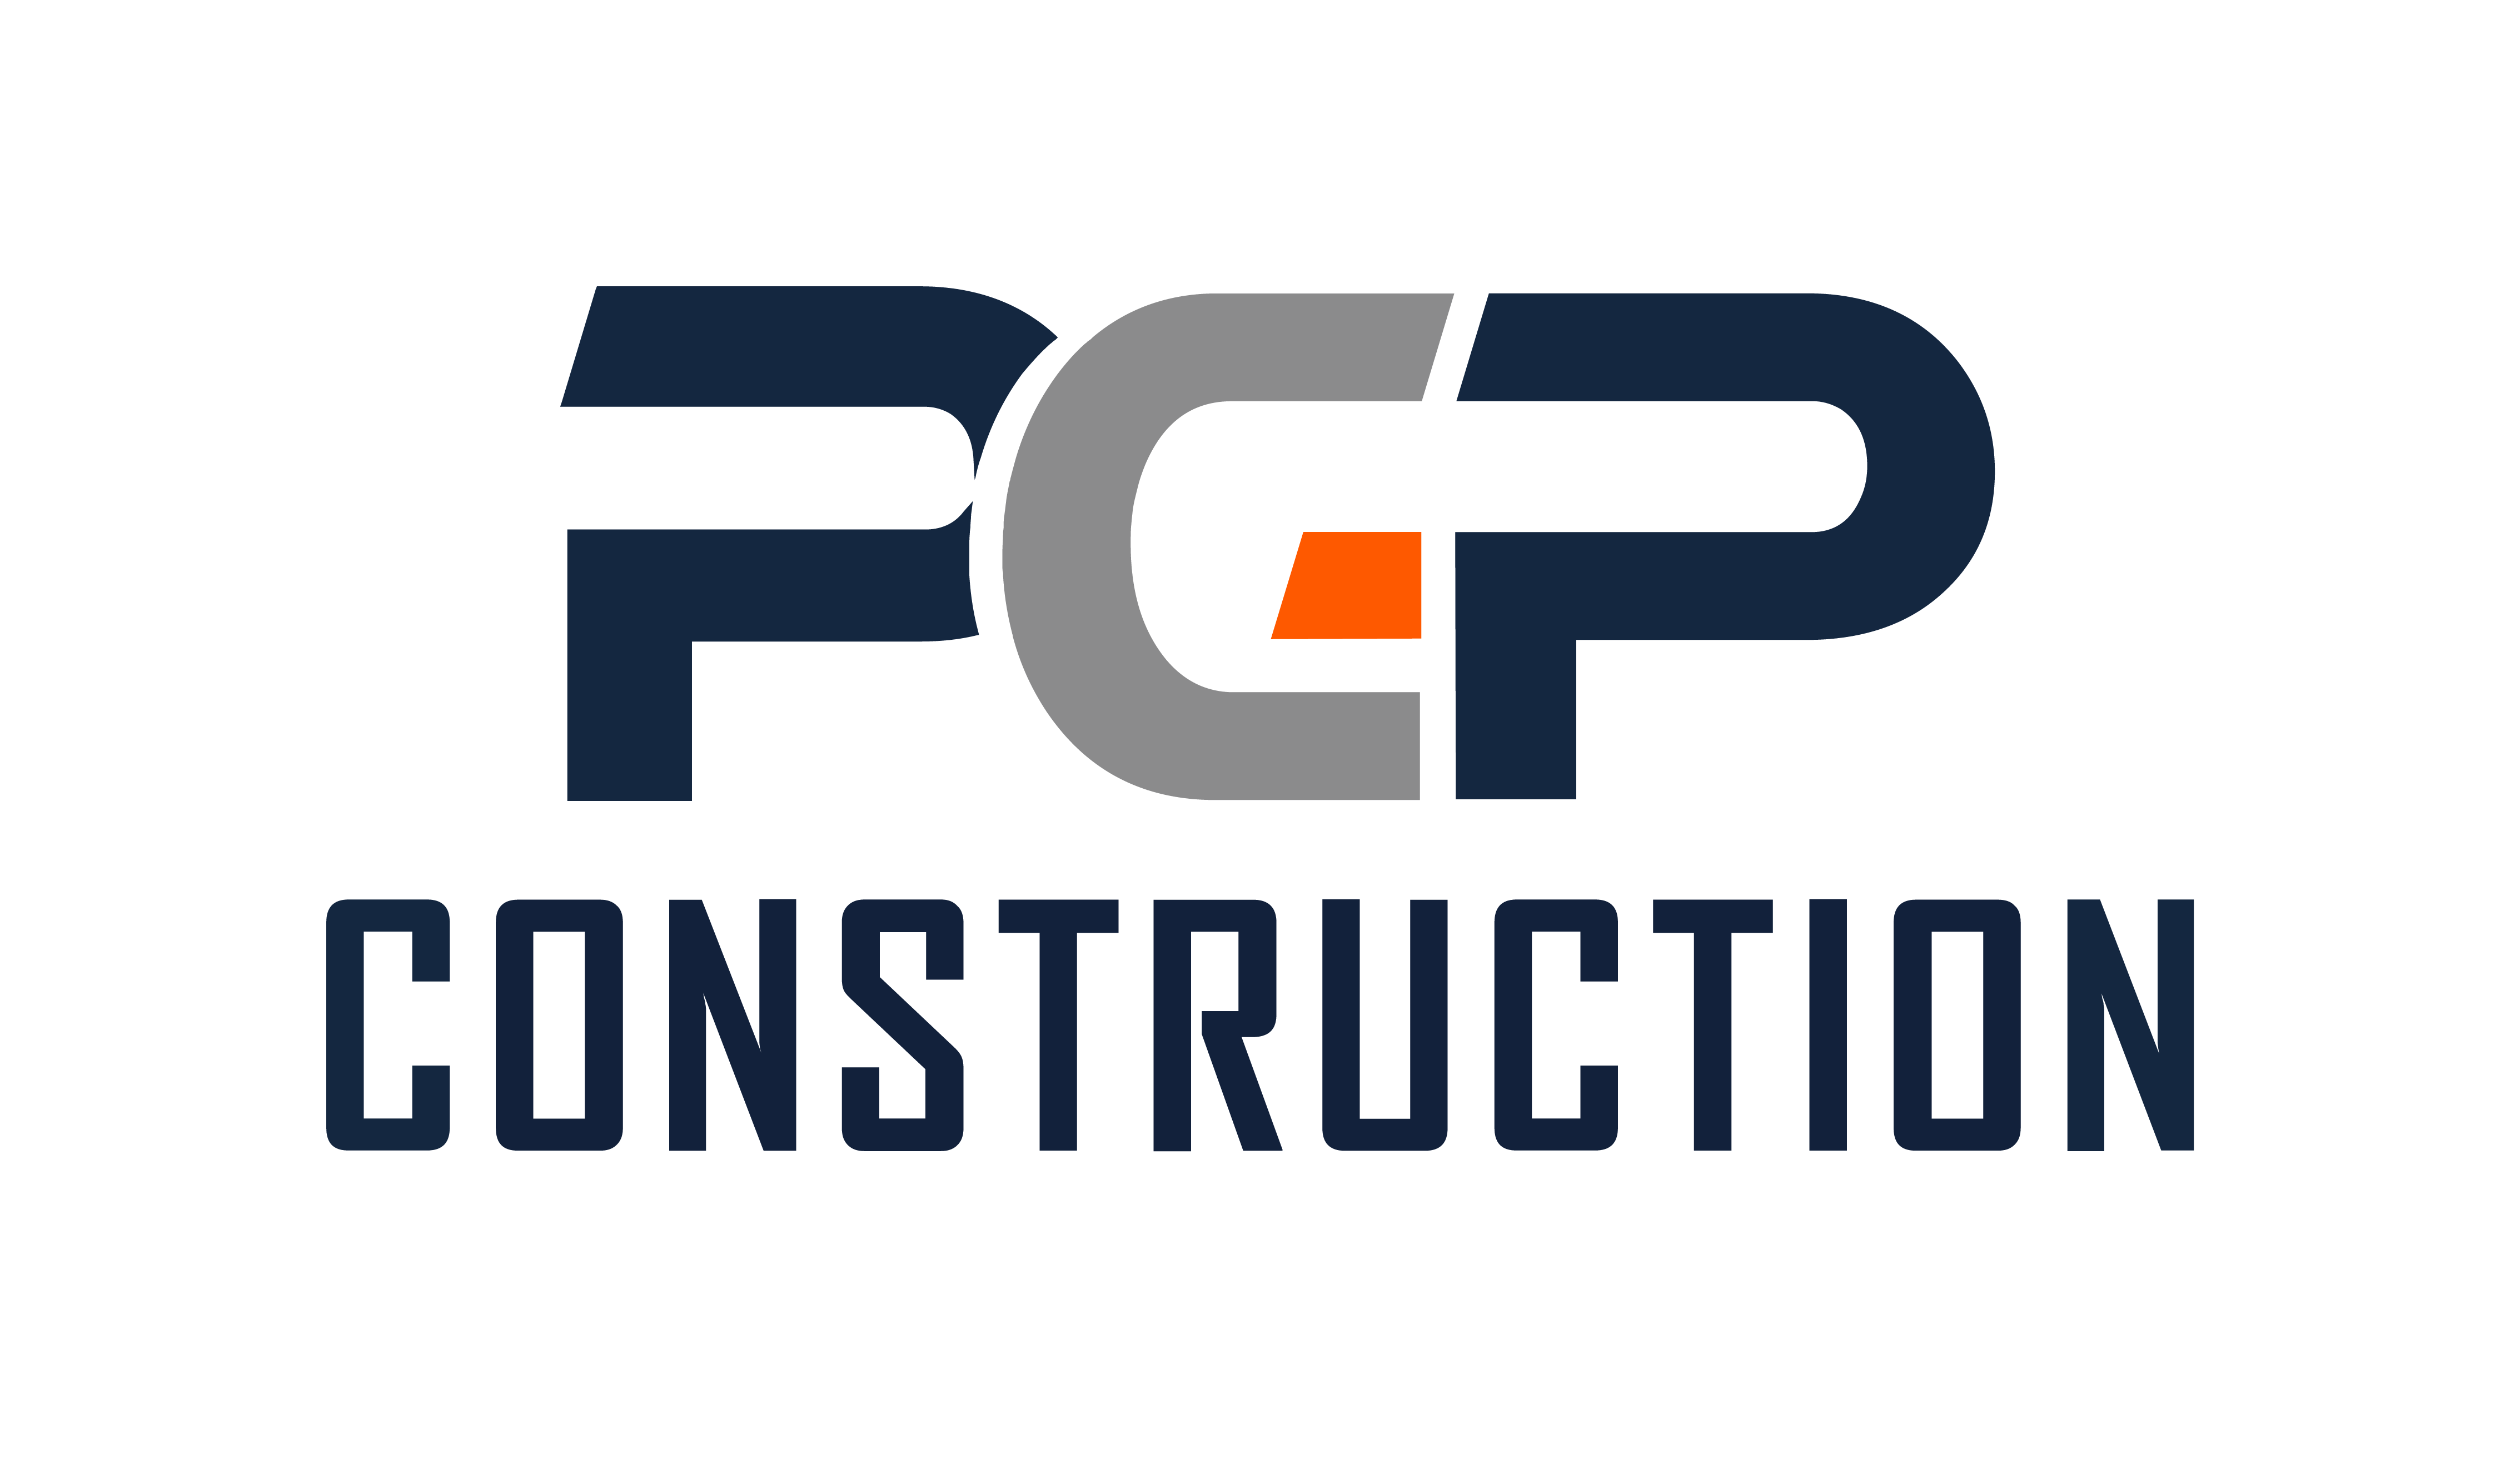 PGP Construction